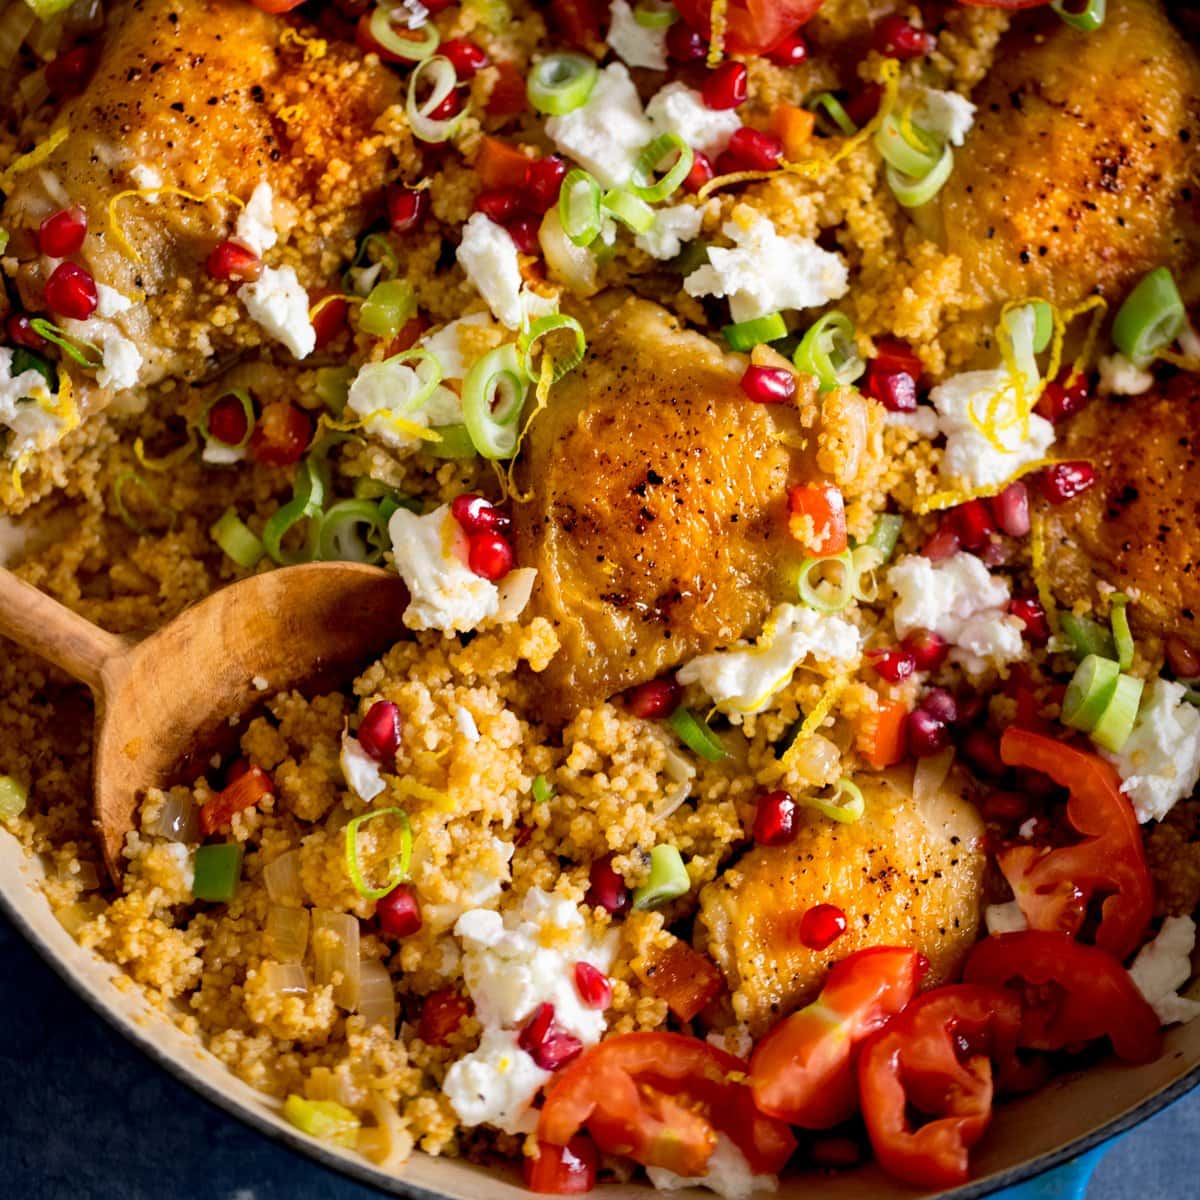 Square image of one-pot chicken and couscous in a blue pan, topped with feta and pomegranate. There is a wooden spoon digging into the couscous.